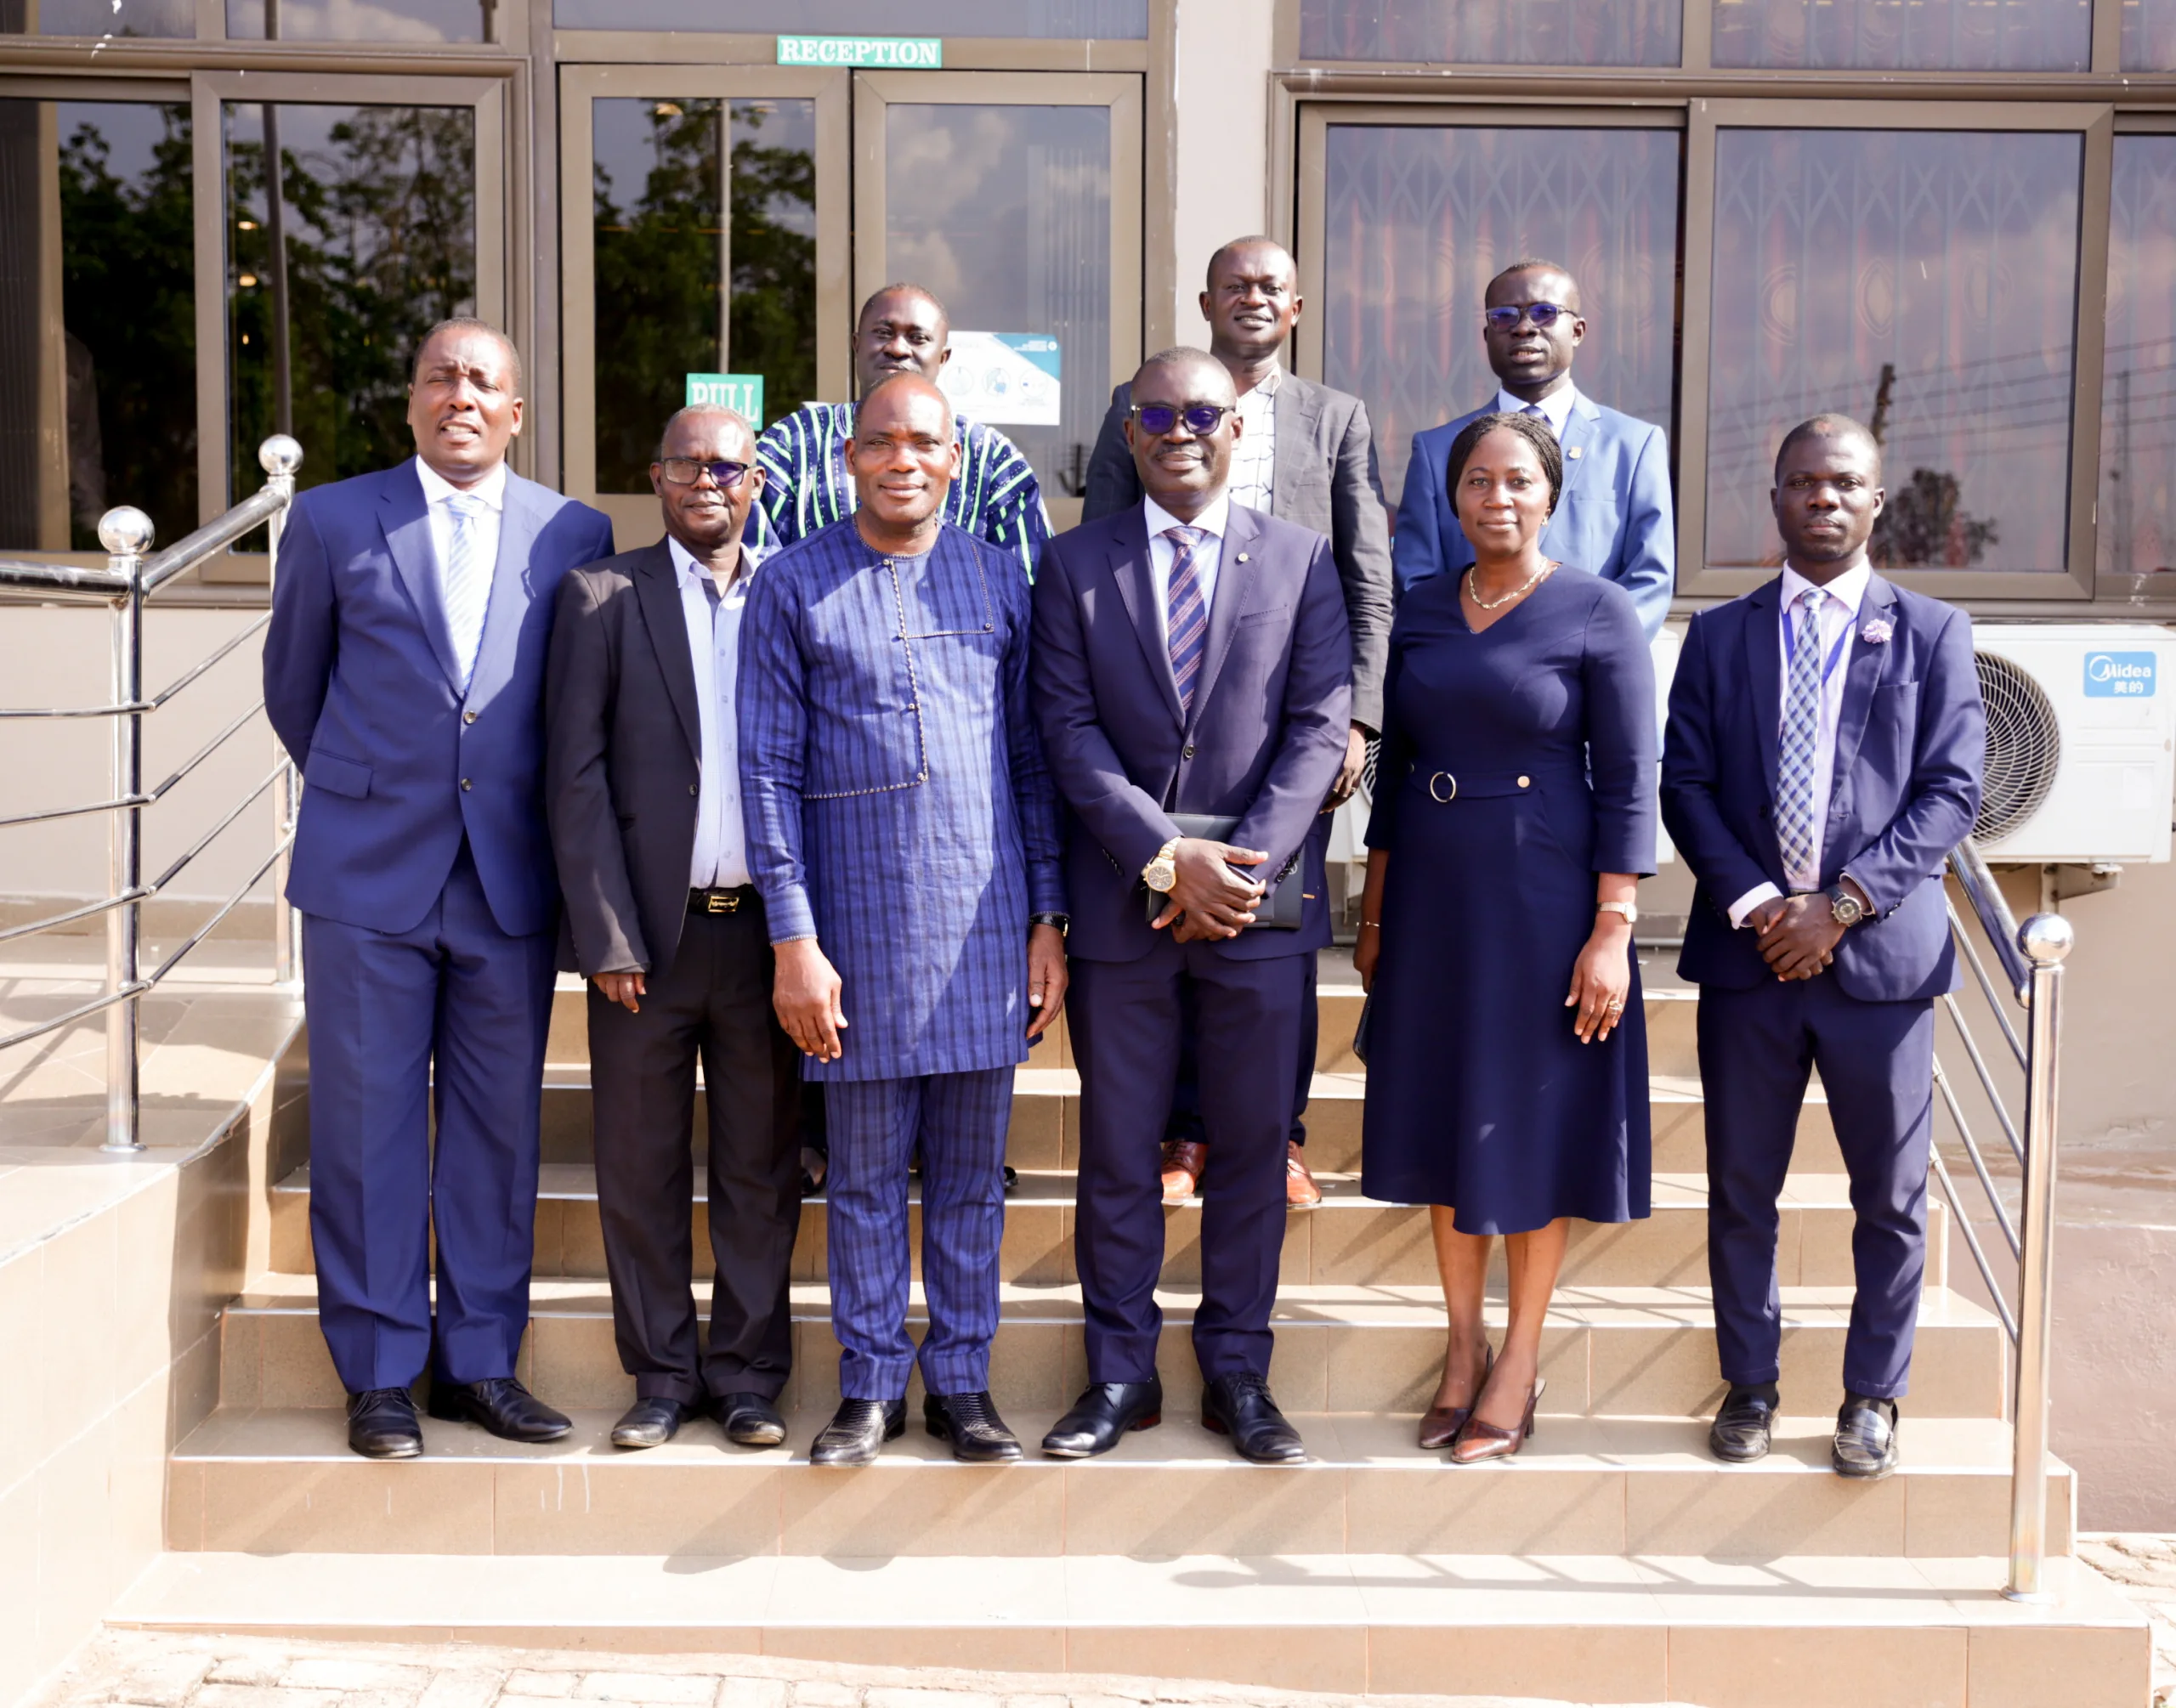 Managing Director of Prudential Bank Pays Courtesy Call on UENR Management, University of Energy and Natural Resources - Sunyani